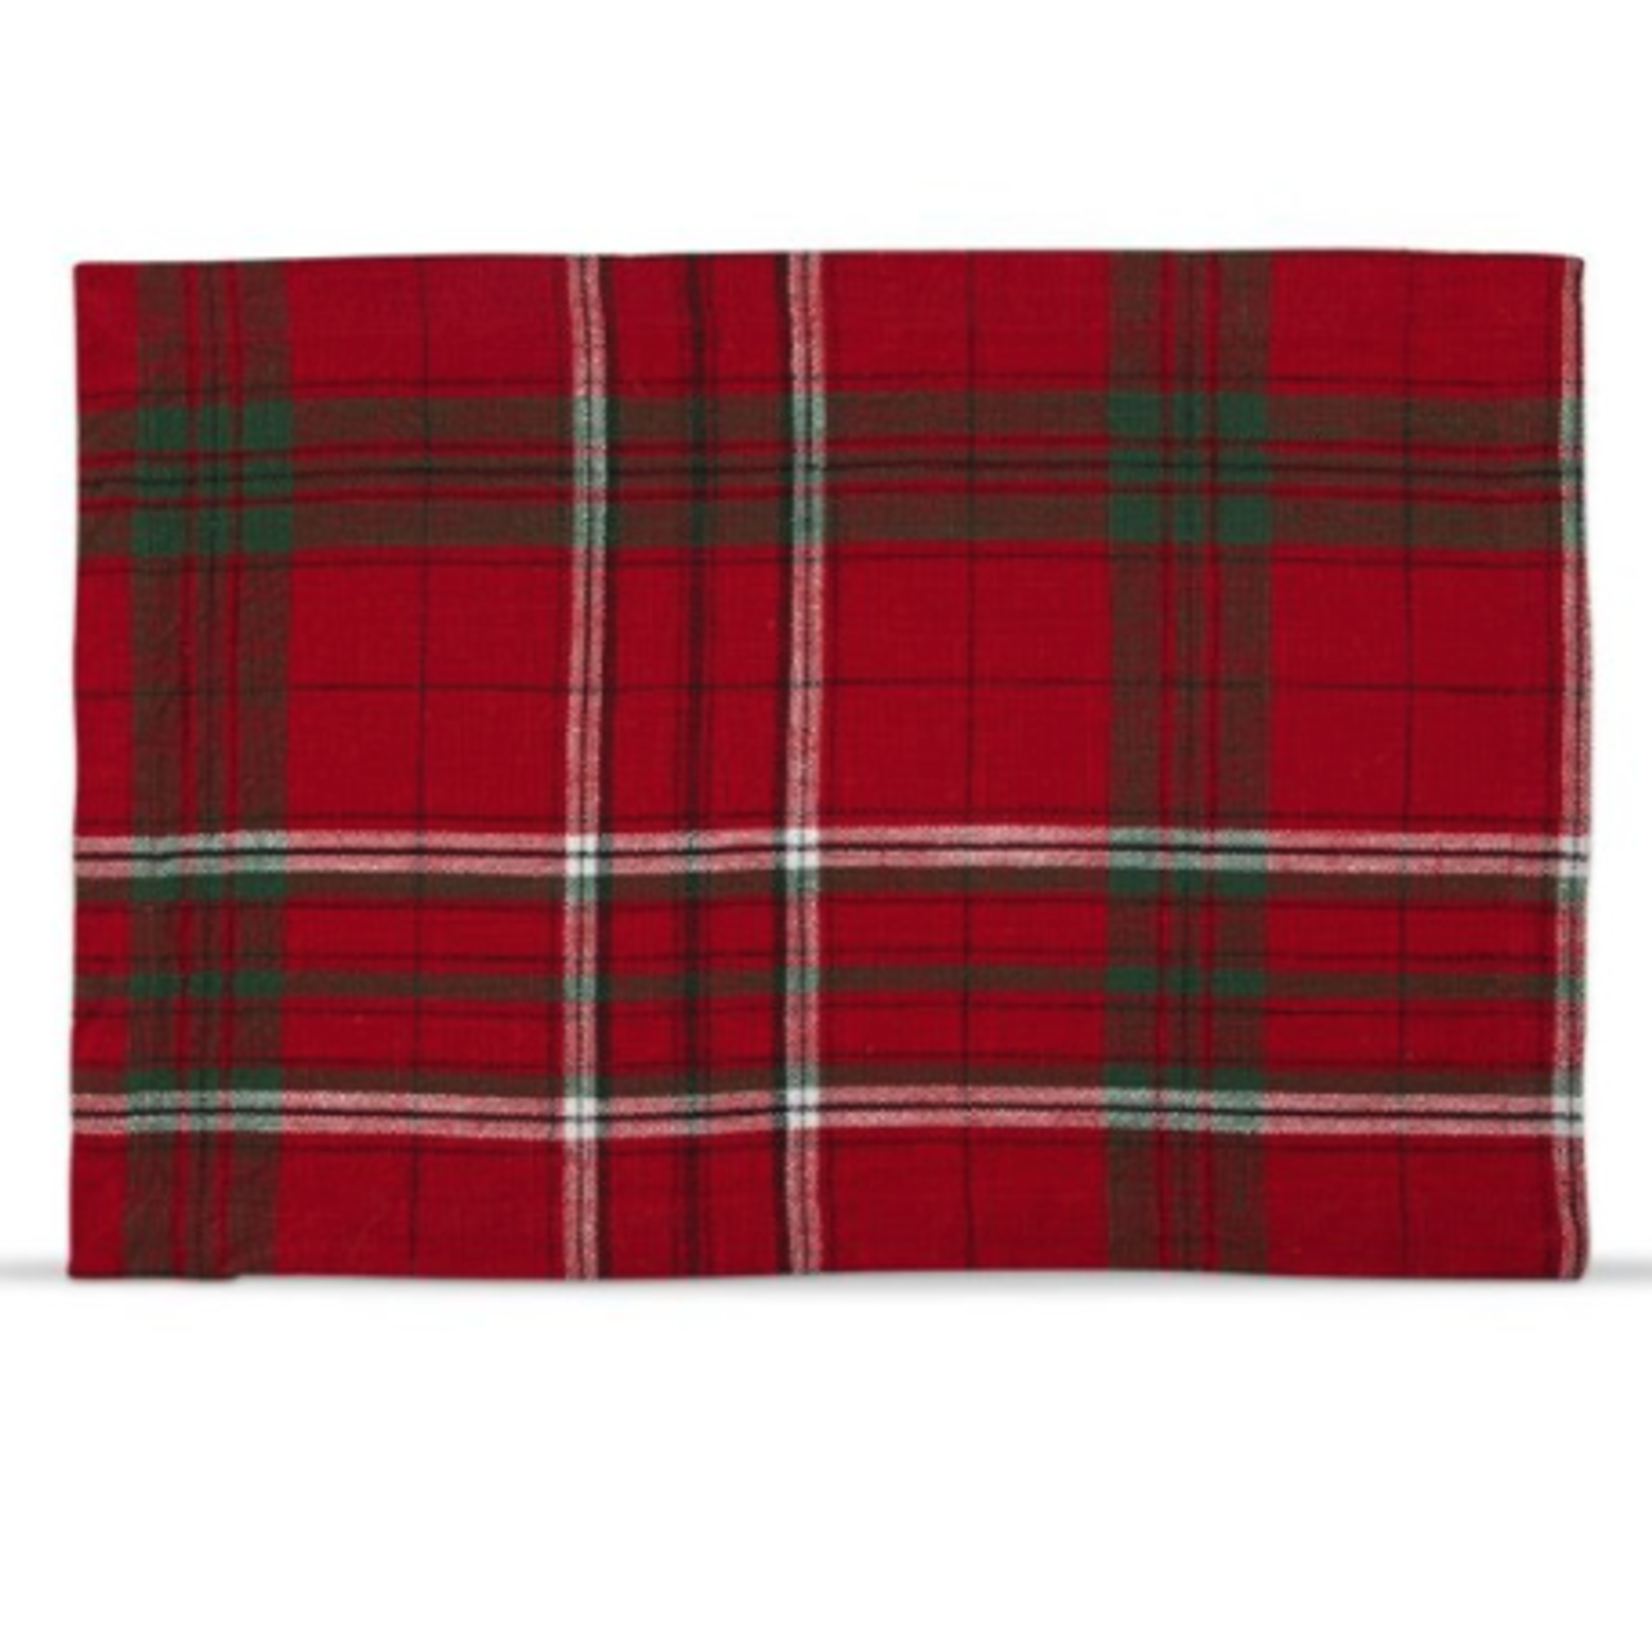 Tag Placemat - Sleigh Ride Holiday Plaid